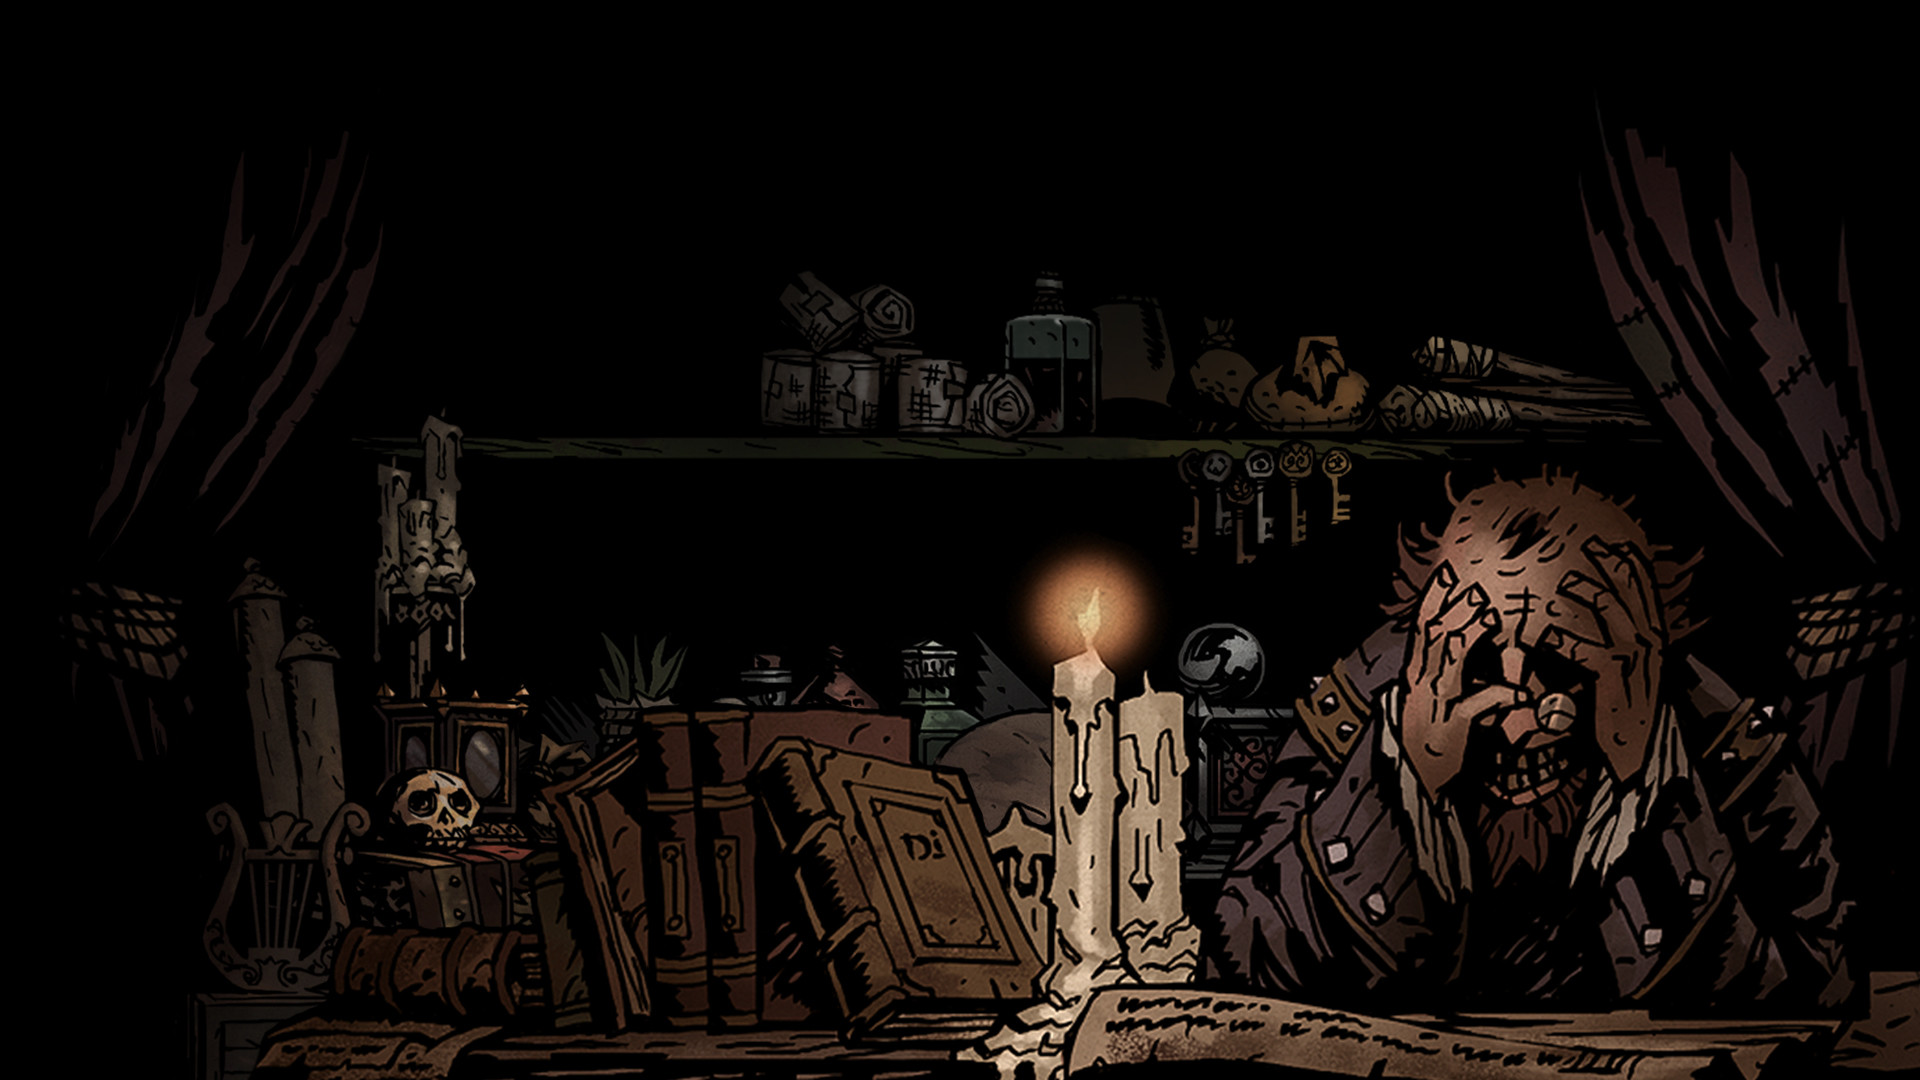 1920x1080 Made some wallpapers using the game assets. [] : darkestdungeon